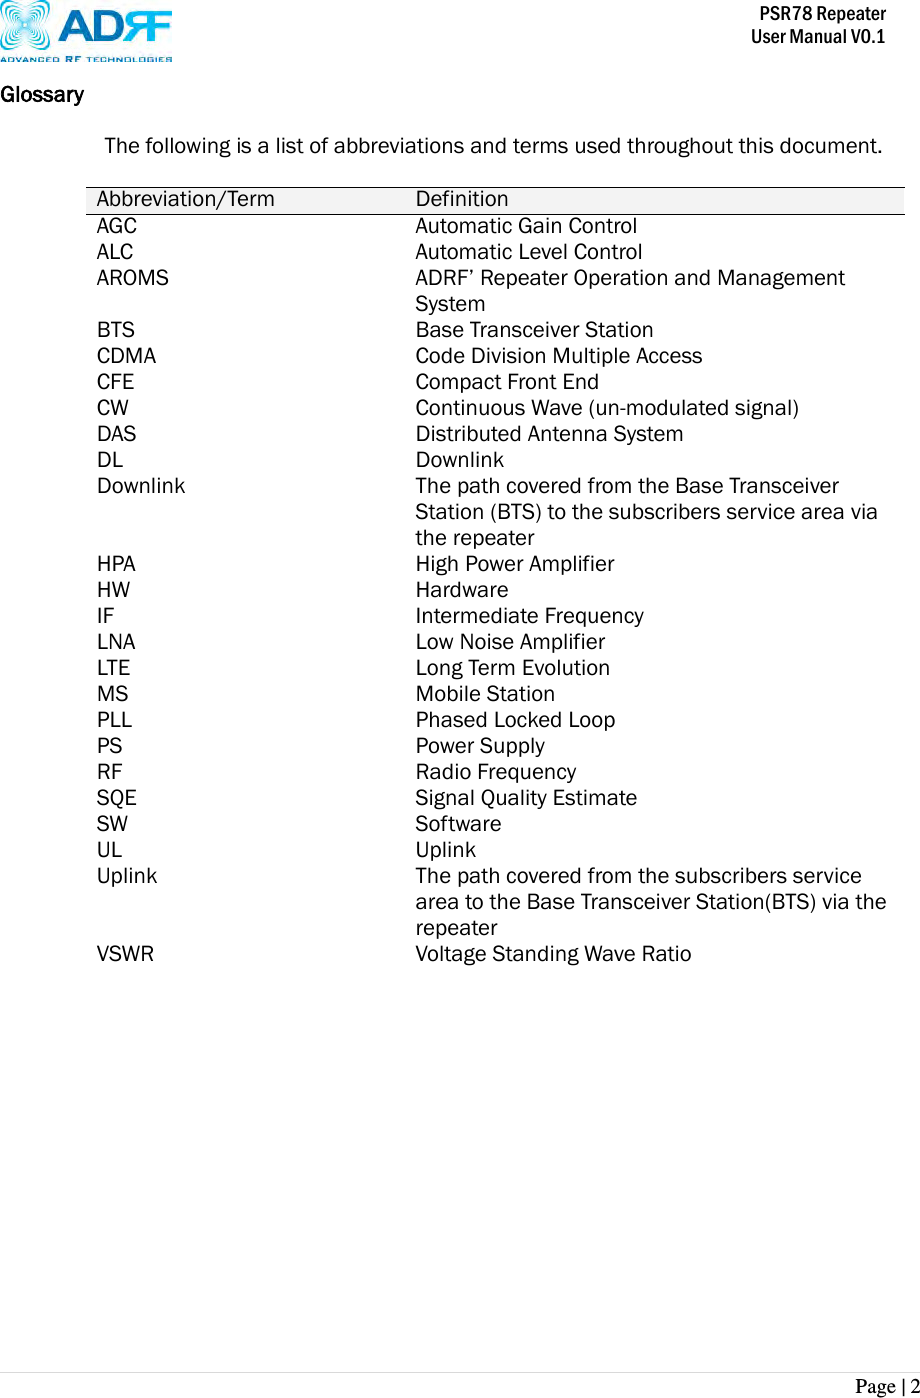           PSR78 Repeater     User Manual V0.1 Page | 2    Glossary The following is a list of abbreviations and terms used throughout this document.  Abbreviation/Term Definition AGC Automatic Gain Control ALC Automatic Level Control AROMS ADRF’ Repeater Operation and Management System BTS Base Transceiver Station CDMA Code Division Multiple Access CFE Compact Front End CW Continuous Wave (un-modulated signal) DAS Distributed Antenna System DL Downlink Downlink The path covered from the Base Transceiver Station (BTS) to the subscribers service area via the repeater HPA High Power Amplifier HW Hardware IF Intermediate Frequency LNA LTE Low Noise Amplifier Long Term Evolution MS Mobile Station   PLL Phased Locked Loop PS Power Supply RF Radio Frequency SQE Signal Quality Estimate SW Software UL Uplink Uplink The path covered from the subscribers service area to the Base Transceiver Station(BTS) via the repeater   VSWR Voltage Standing Wave Ratio  